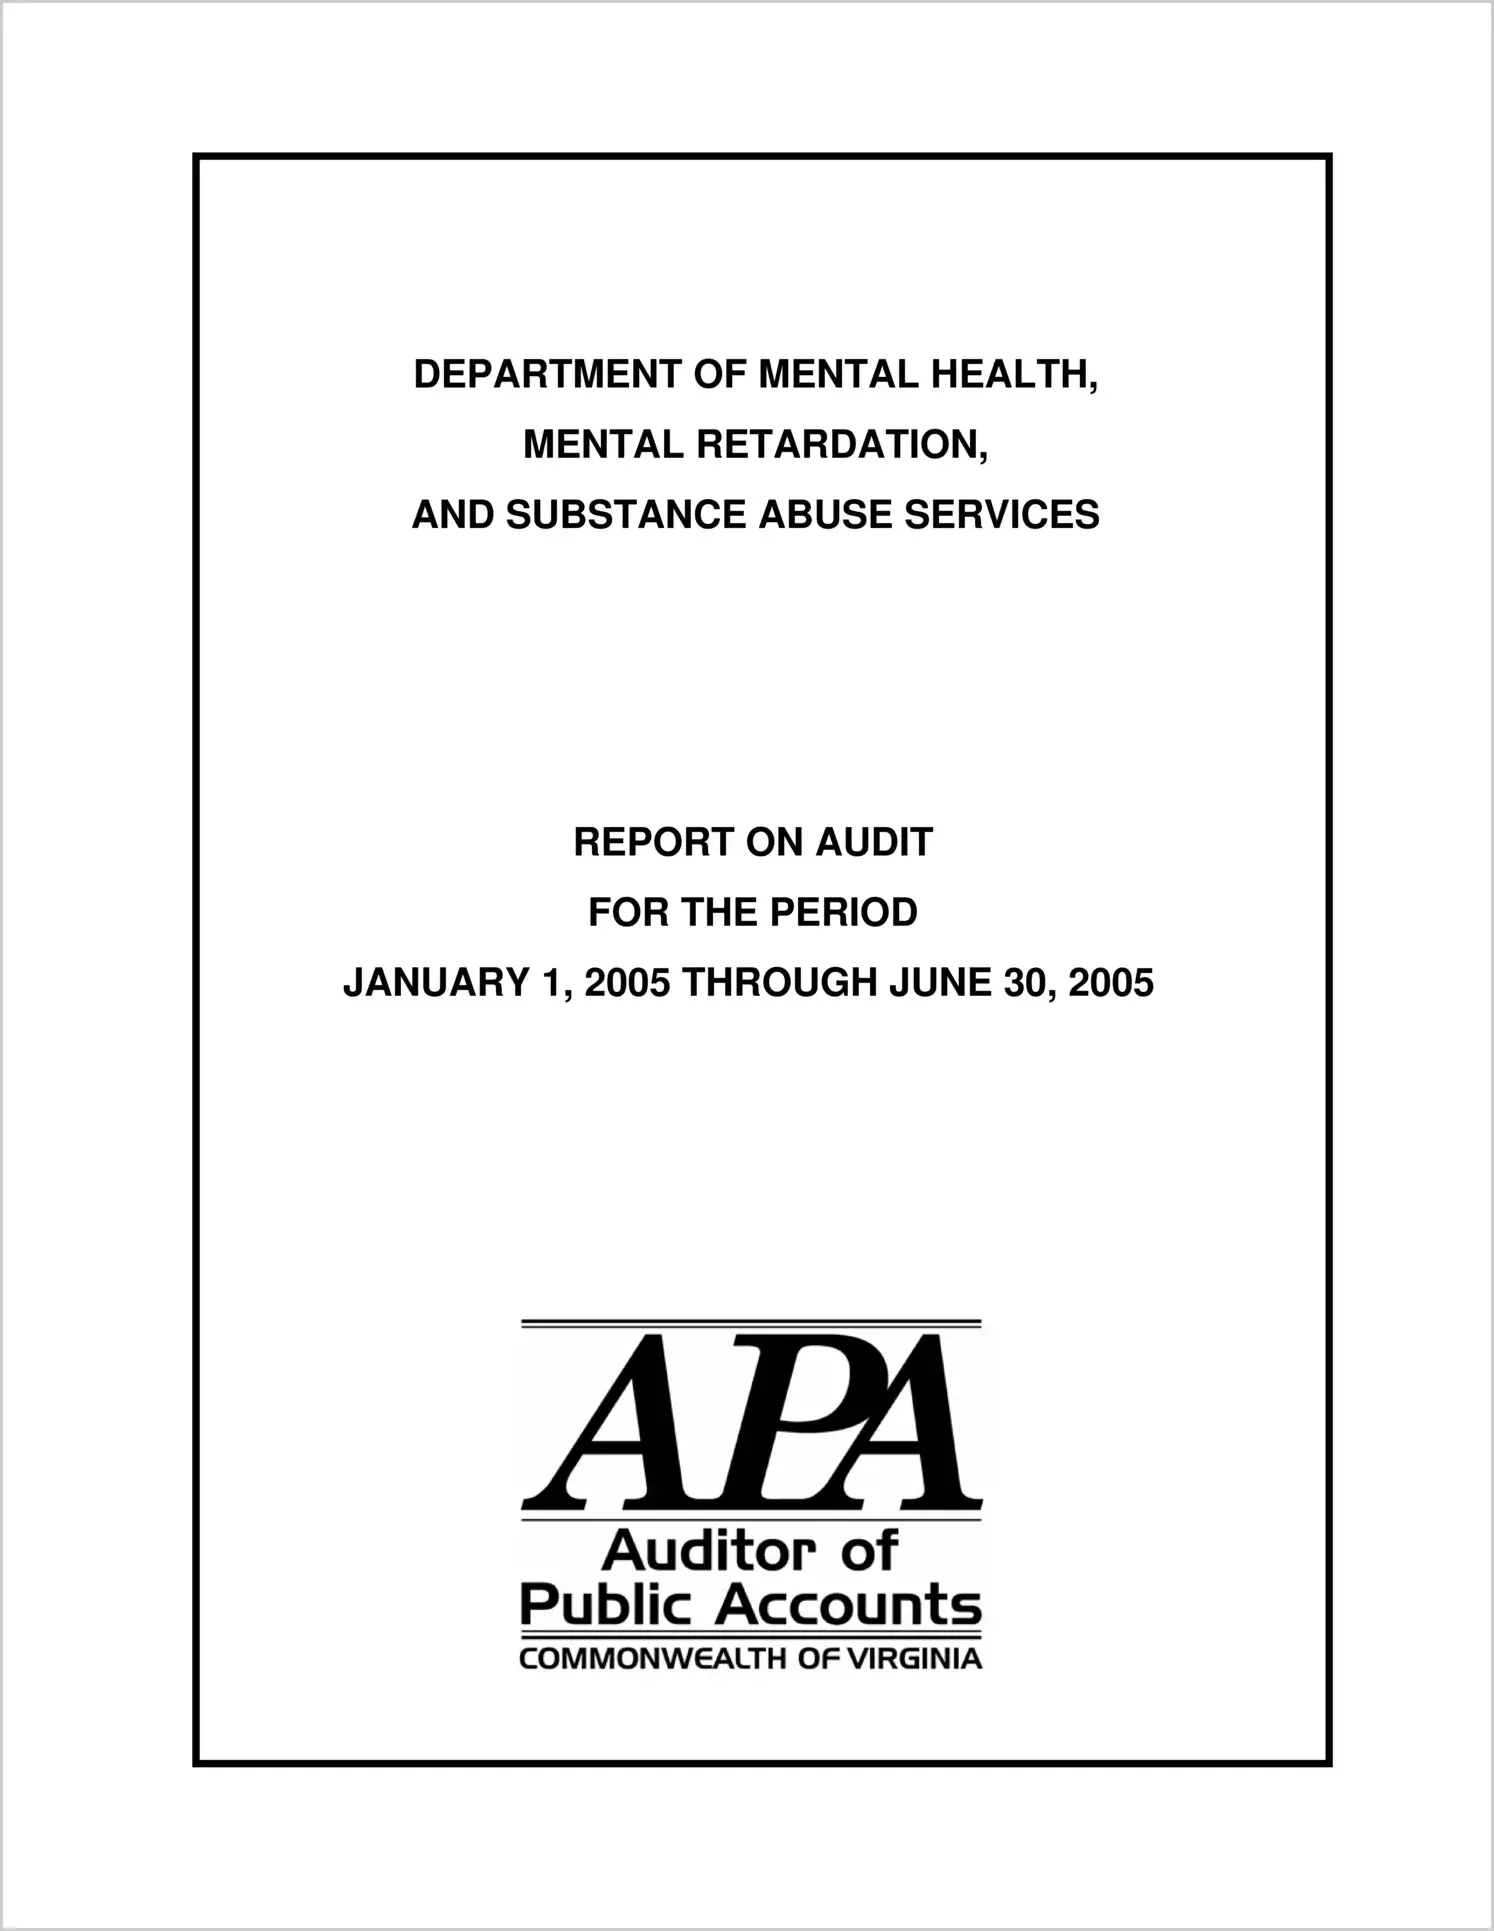 Department of Mental Health, Mental Retardation, and Substance Abuse Services for the audit period January 1, 2005 through June 30, 2005